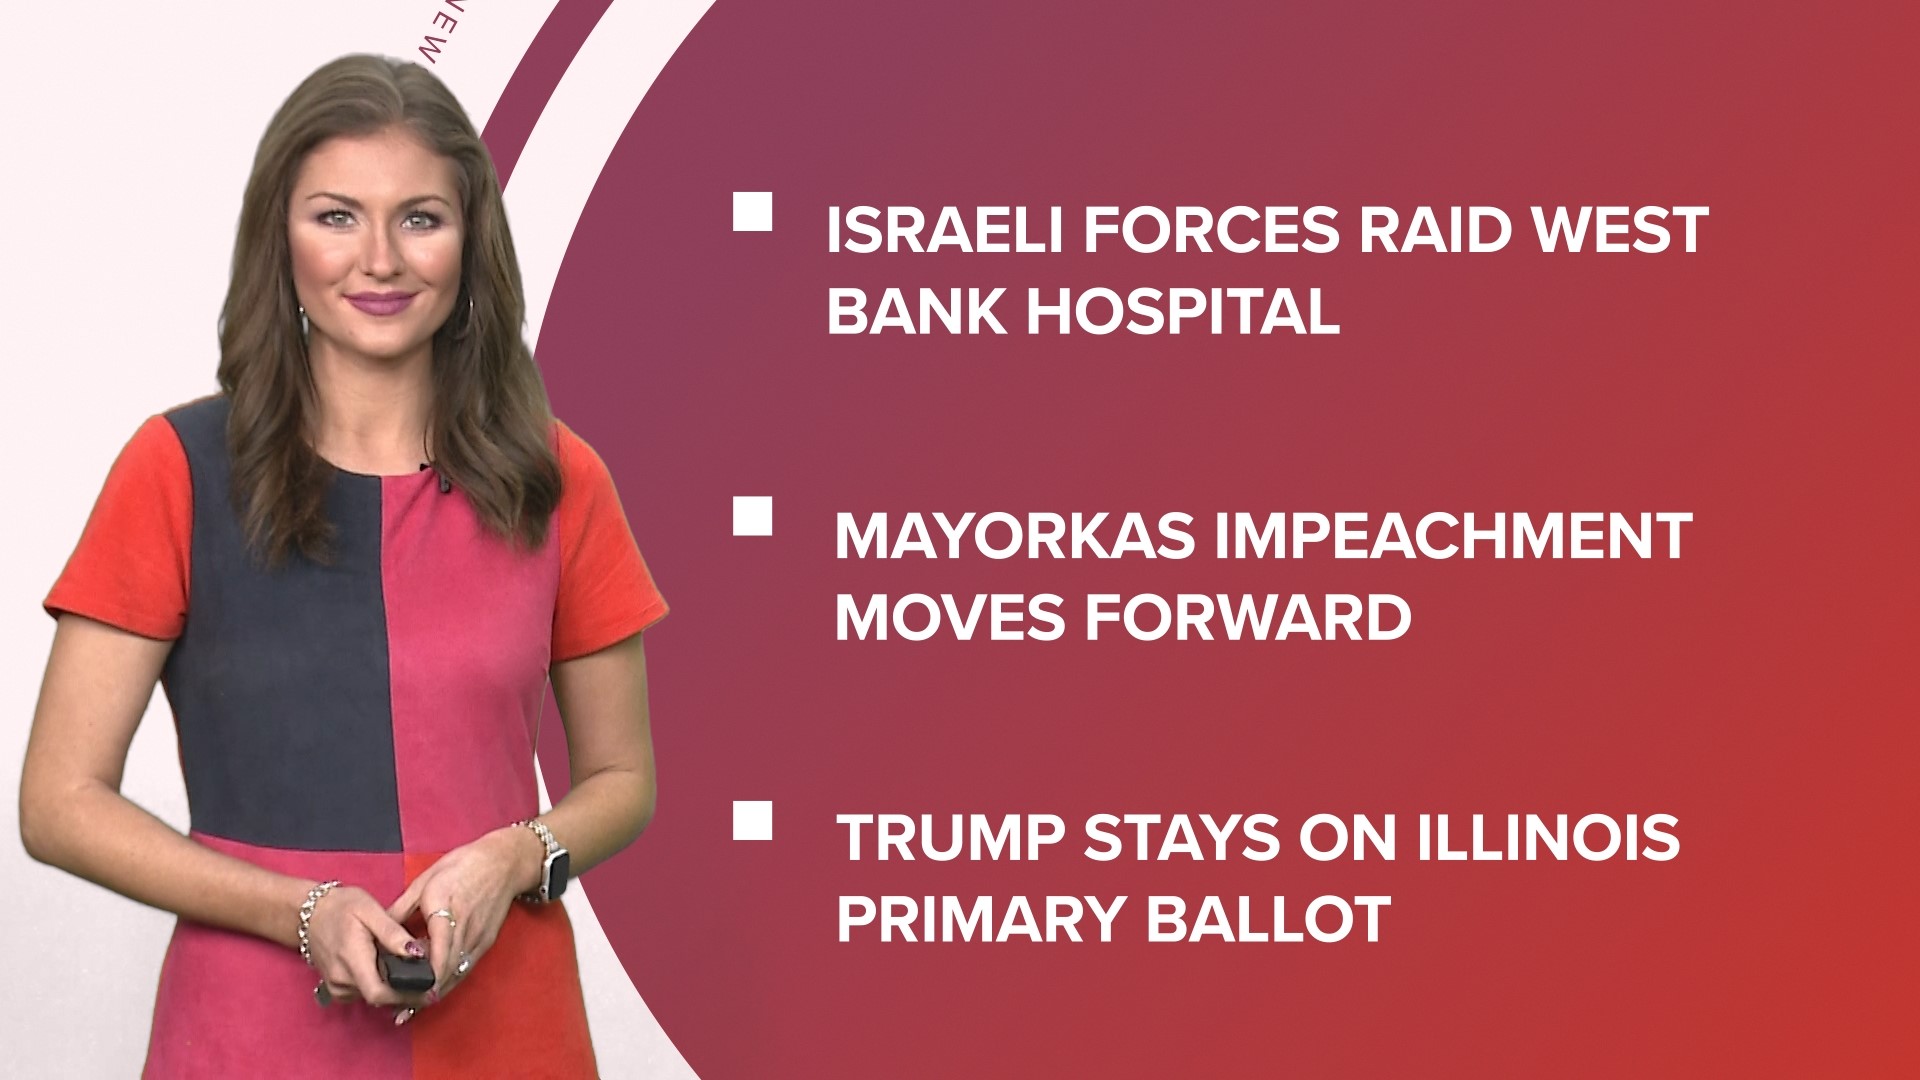 A look at what is happening in the news from Israeli forces raid a West Bank hospital to UPS cutting jobs and a judge void Elon Musk's $56B pay package.